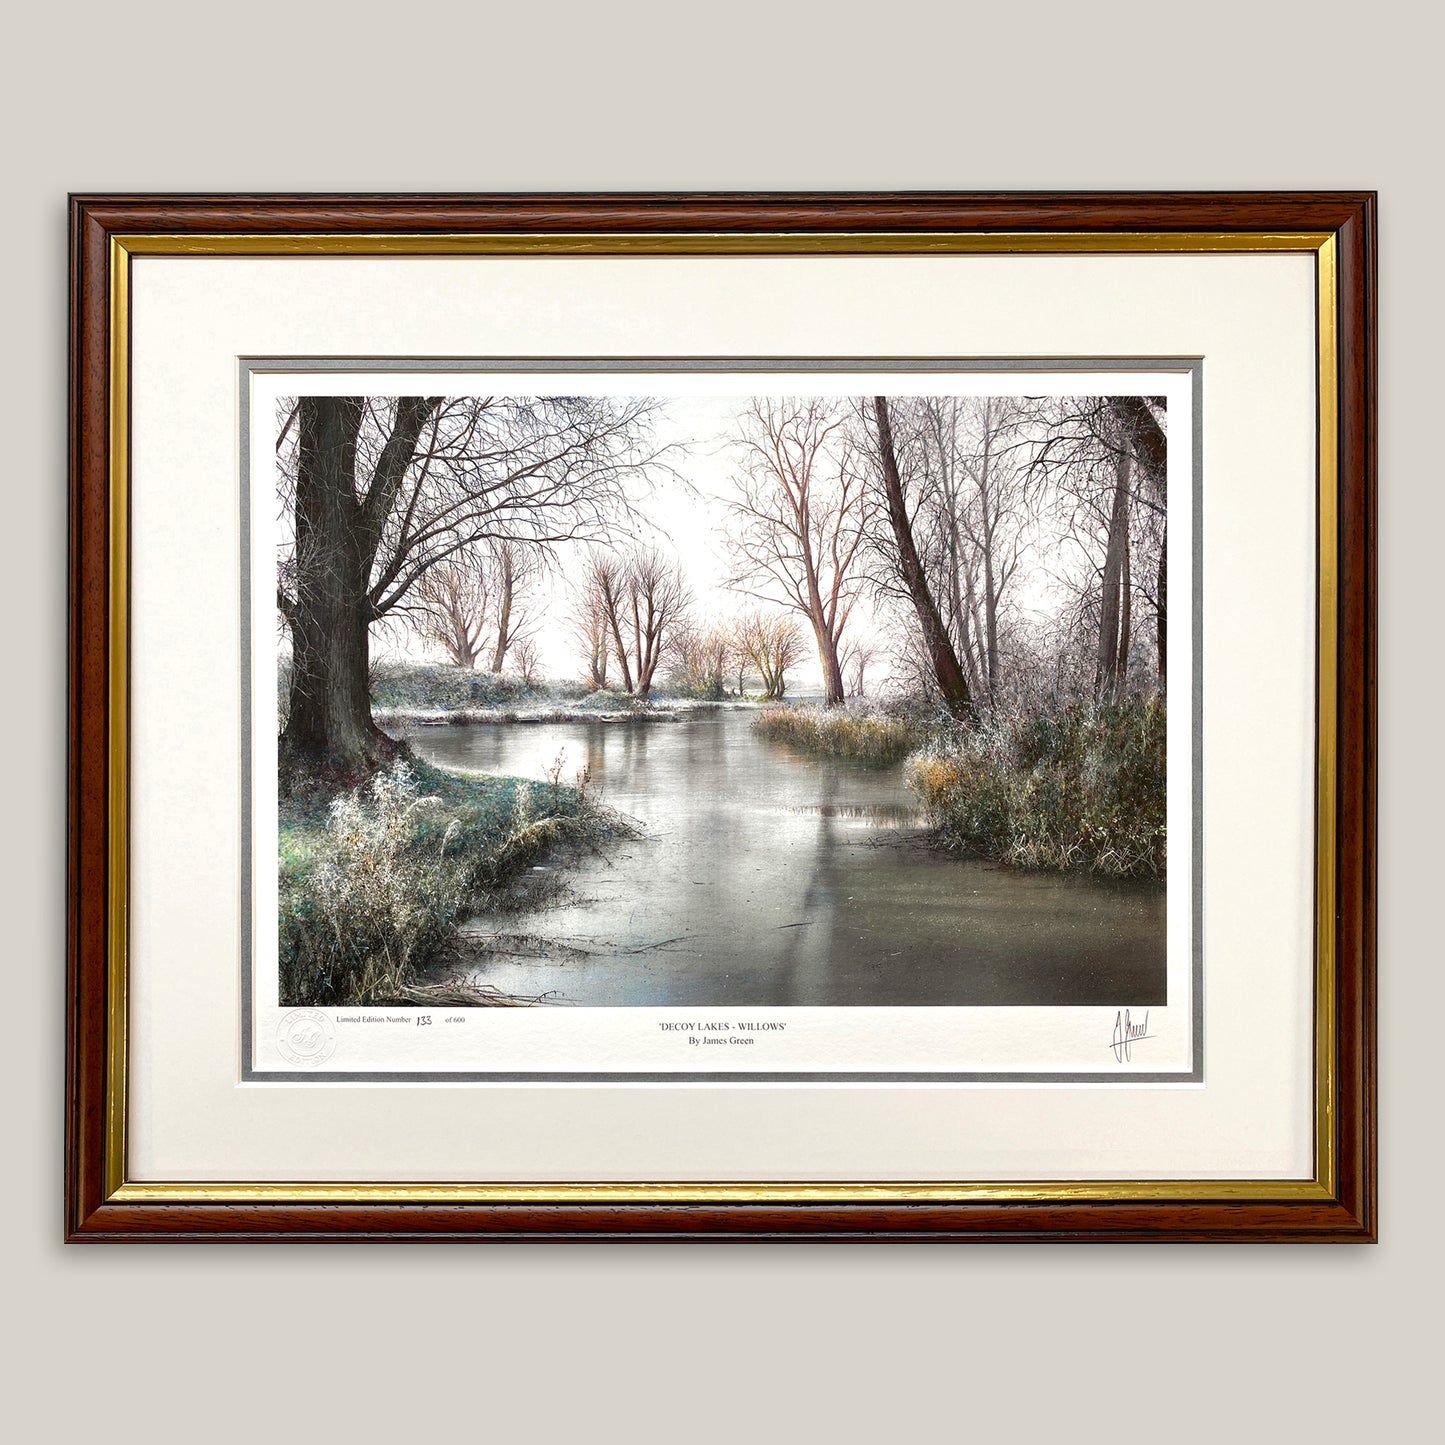 decoy willows fishing lakes framed print